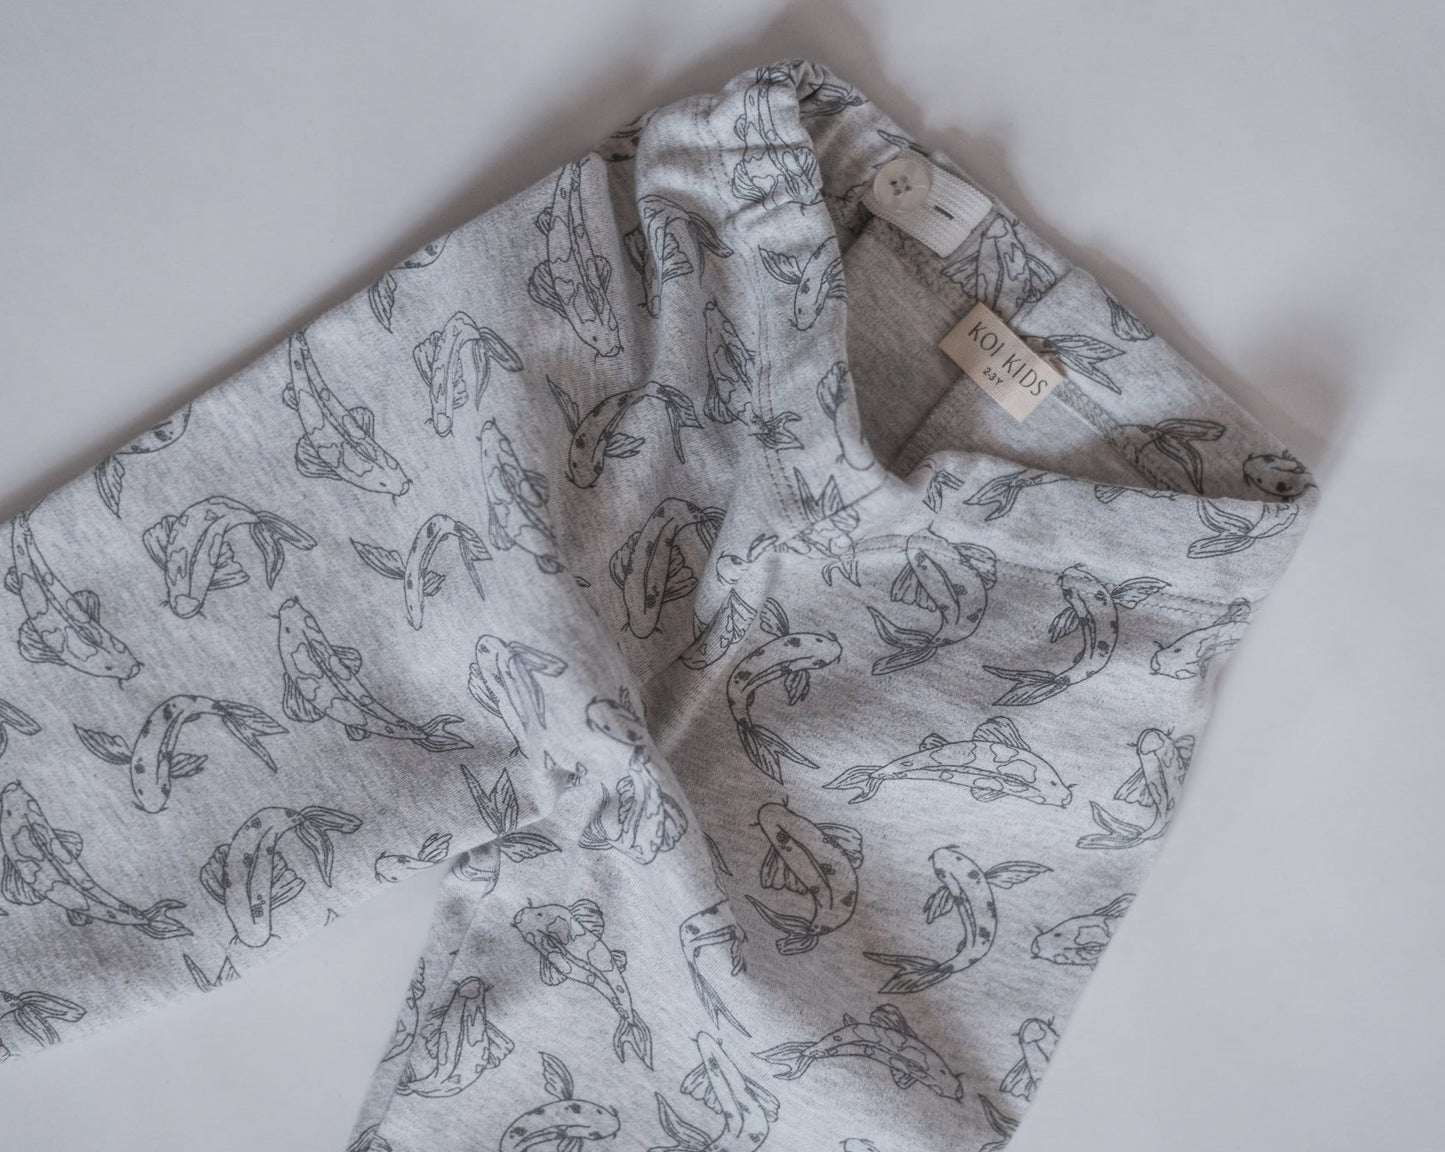 Leggings made from 100% GOTS certified organic cotton covered in our Koi fish allover print. Our leggings are designed with a soft elastic adjustable waist, foldable cuffs at the bottom of the legs.